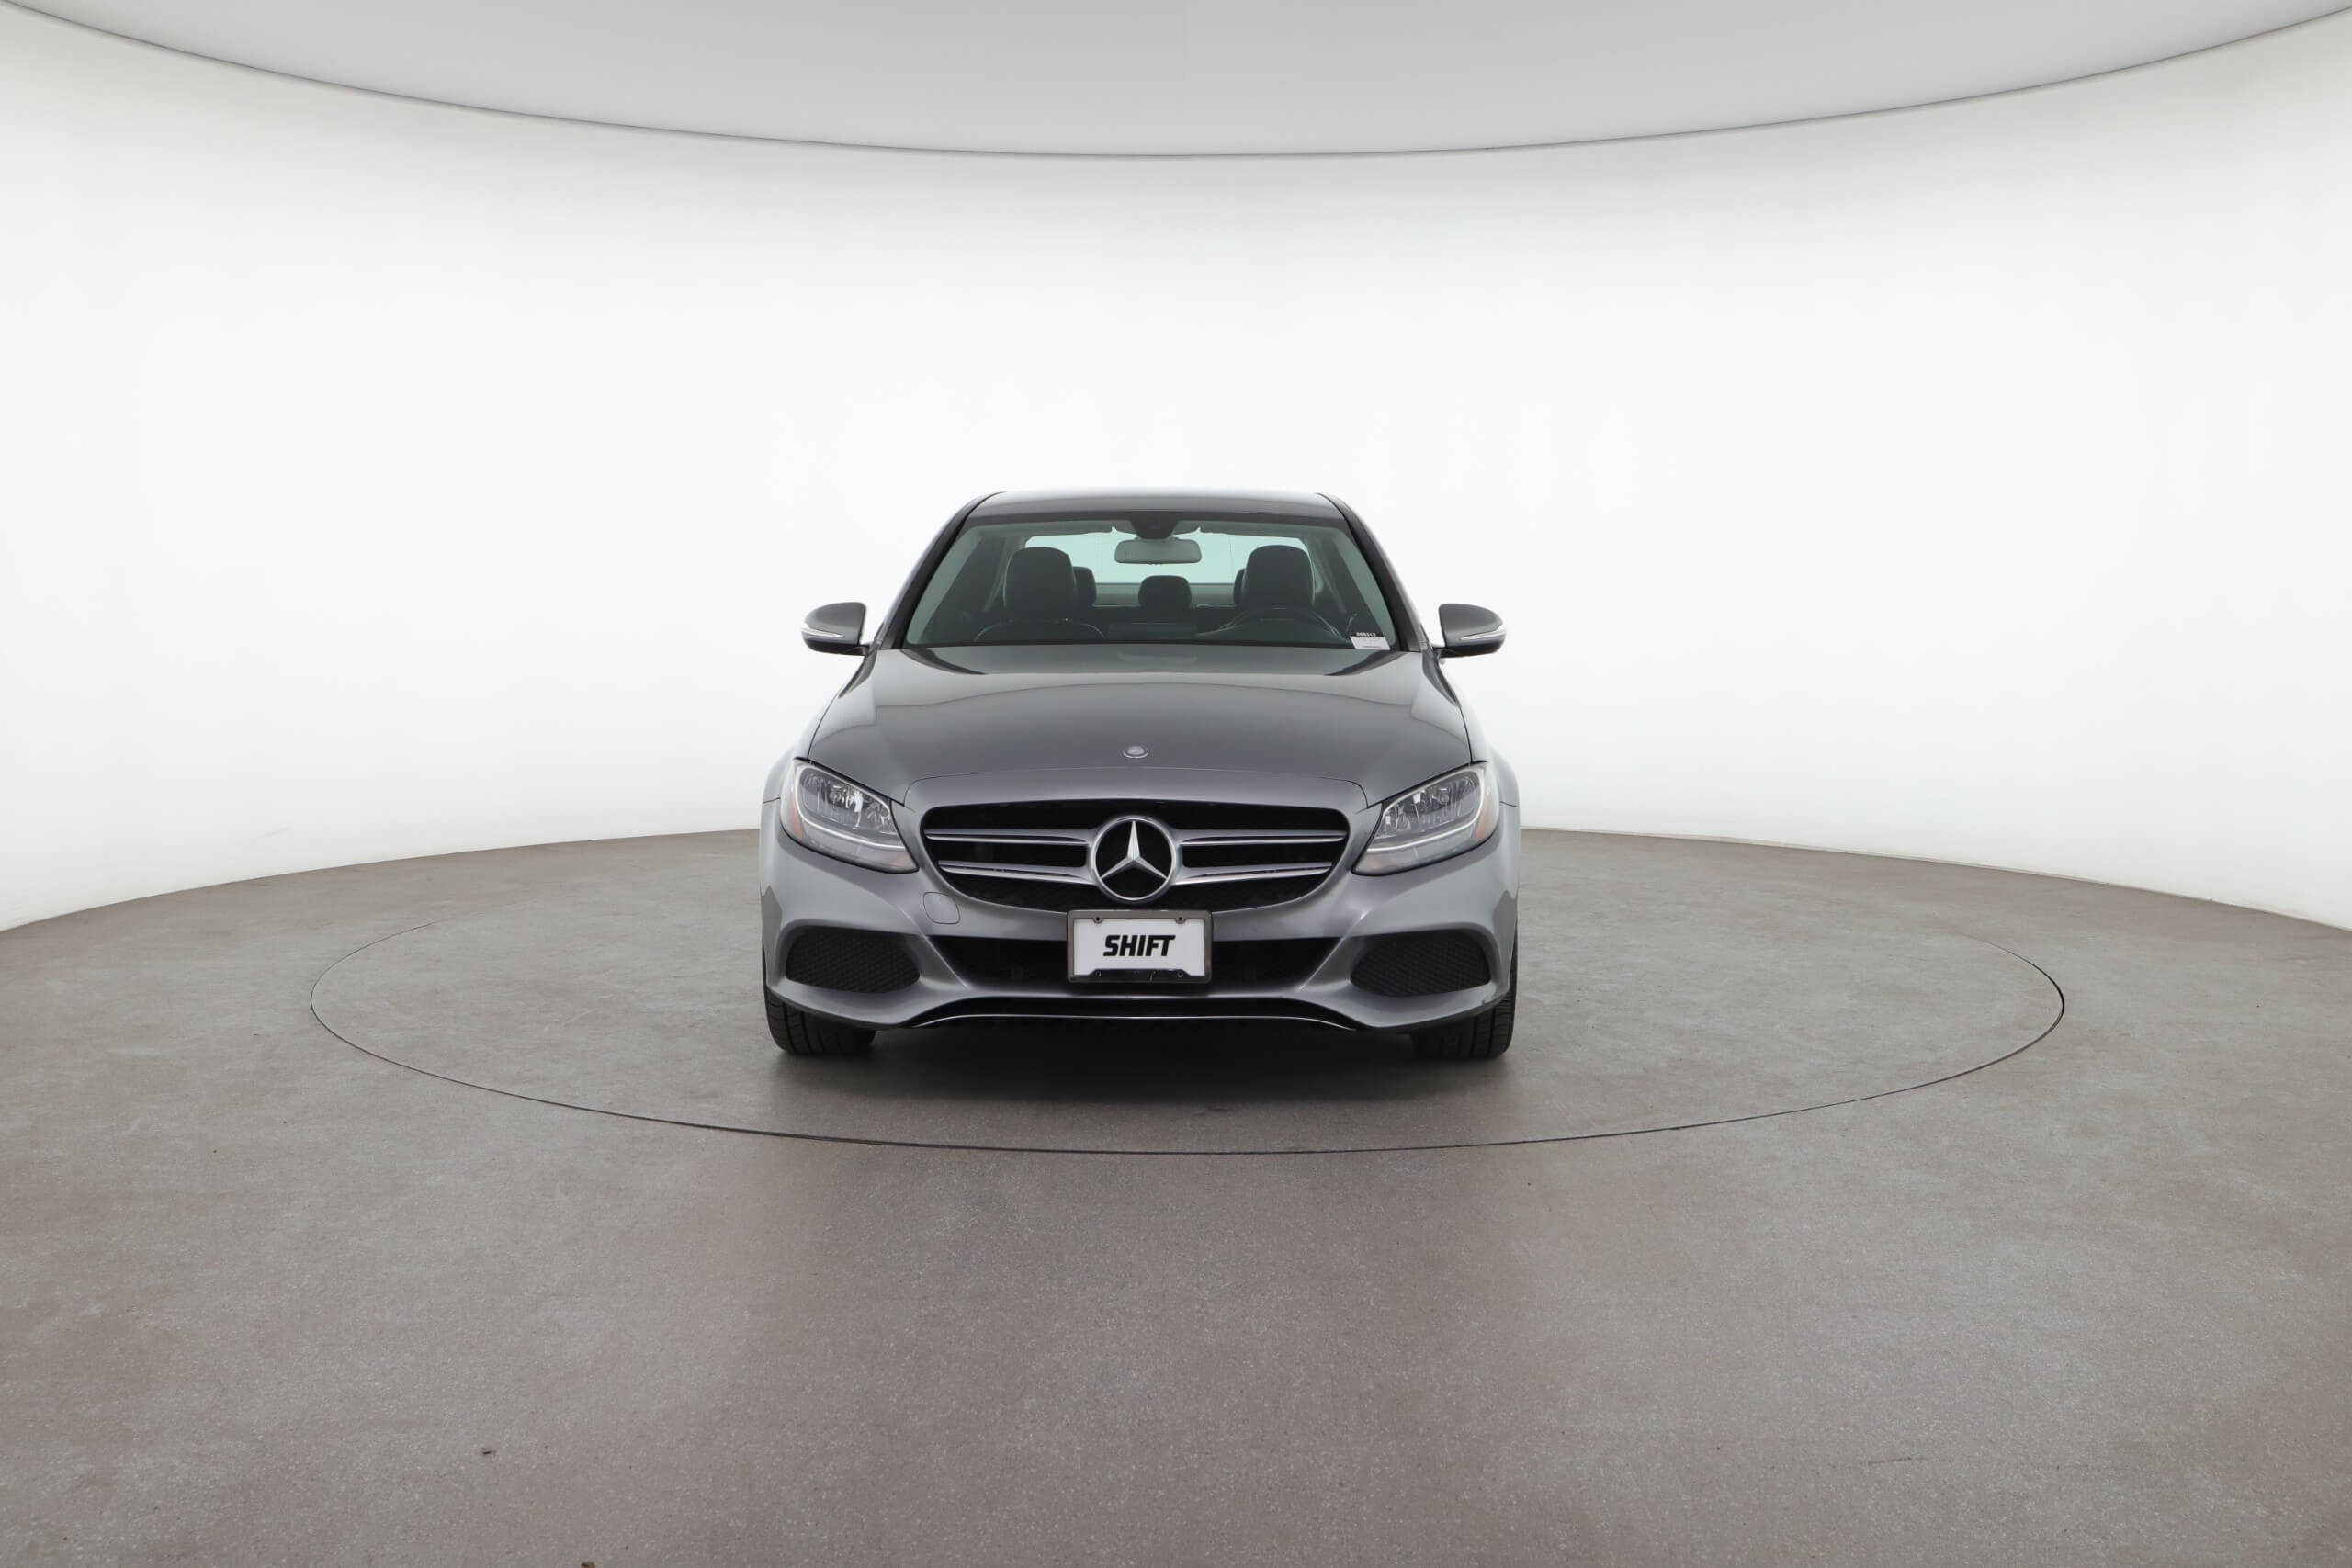 Mercedes-Benz C300 Review: Pricing, Specs & More | Shift